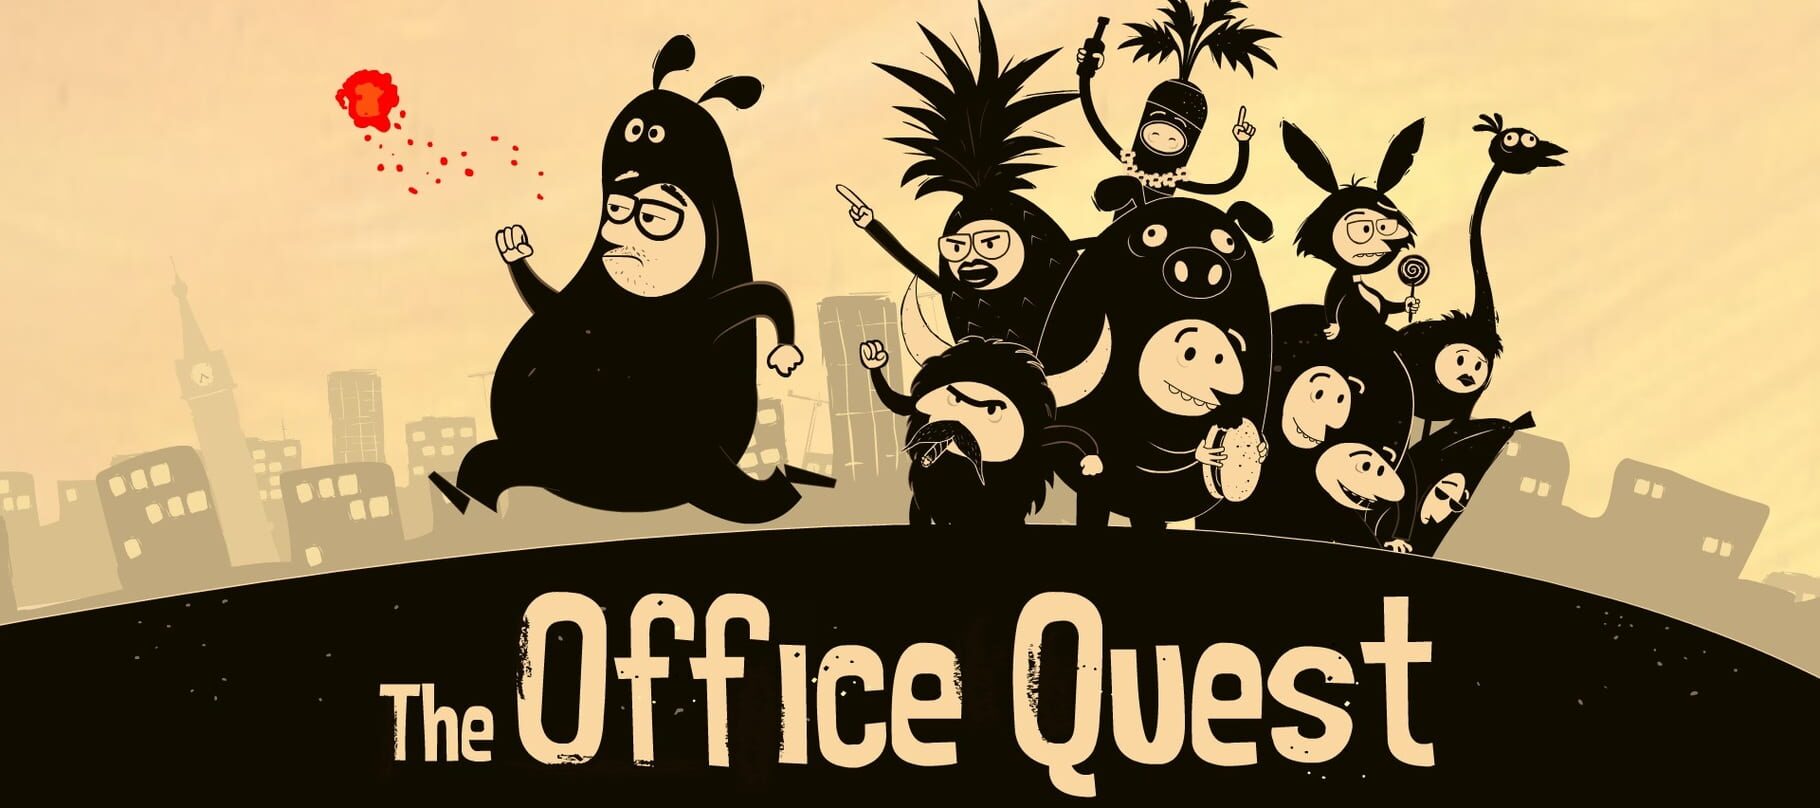 The Office Quest artwork